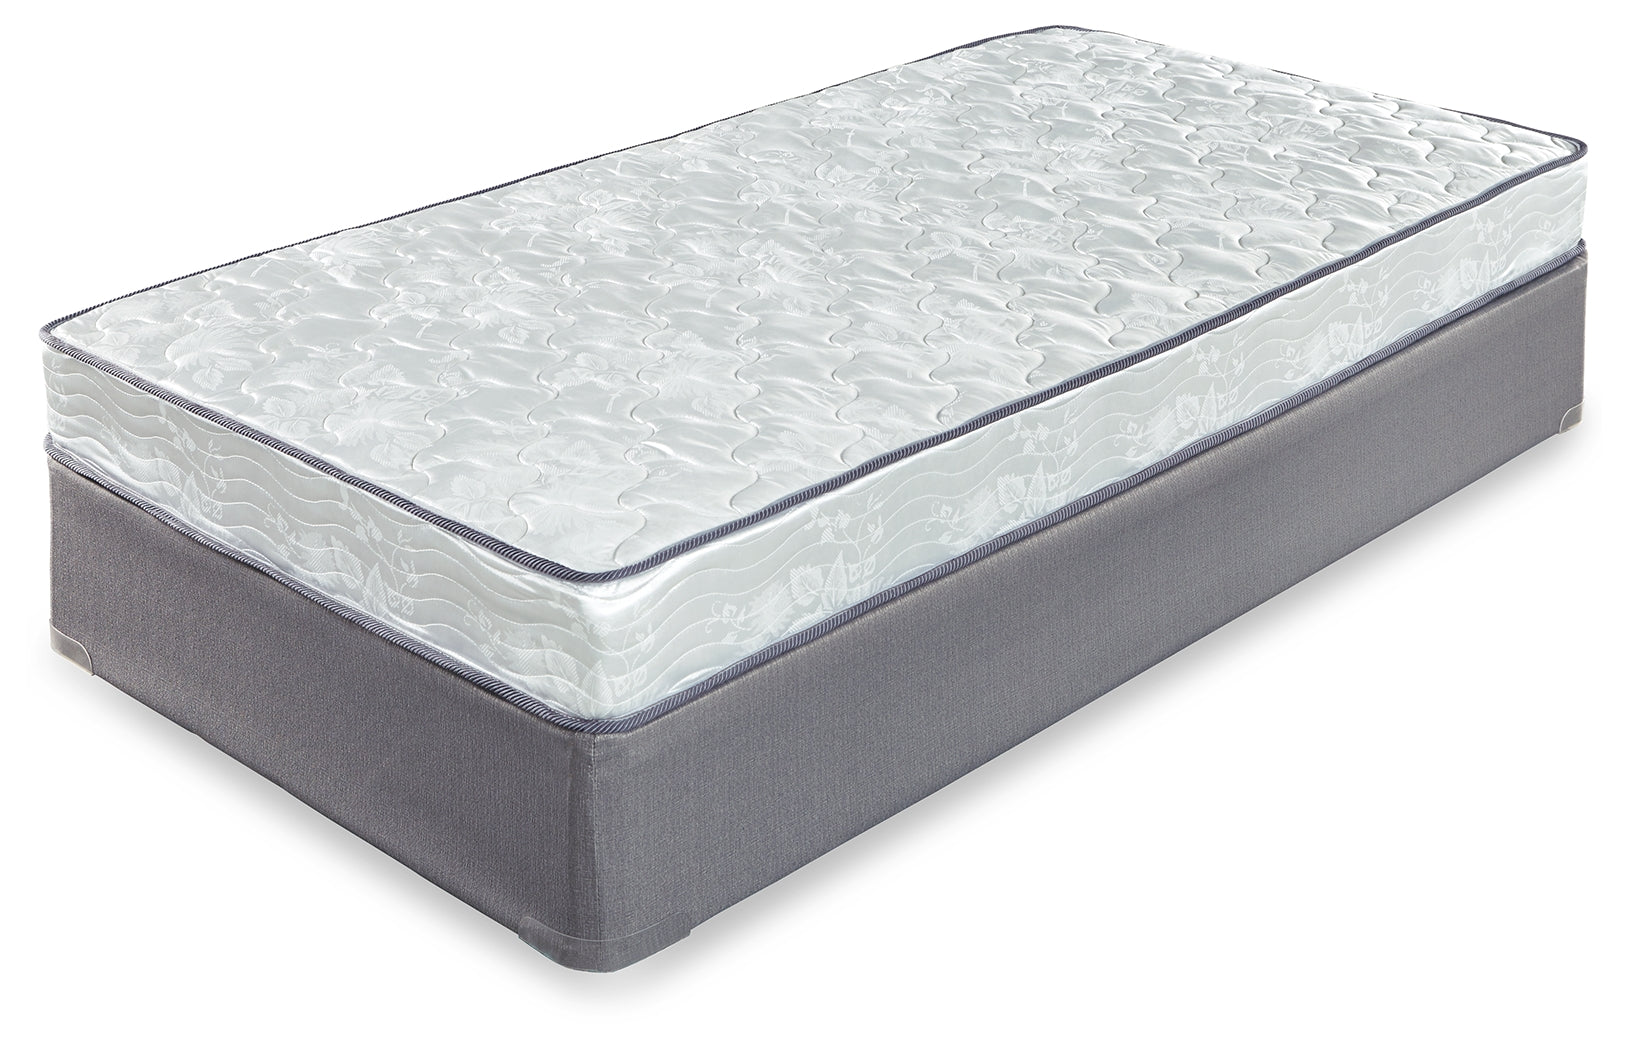 6 Inch Bonnell Queen Mattress with Head-Foot Model-Good Queen Adjustable Base - furniture place usa